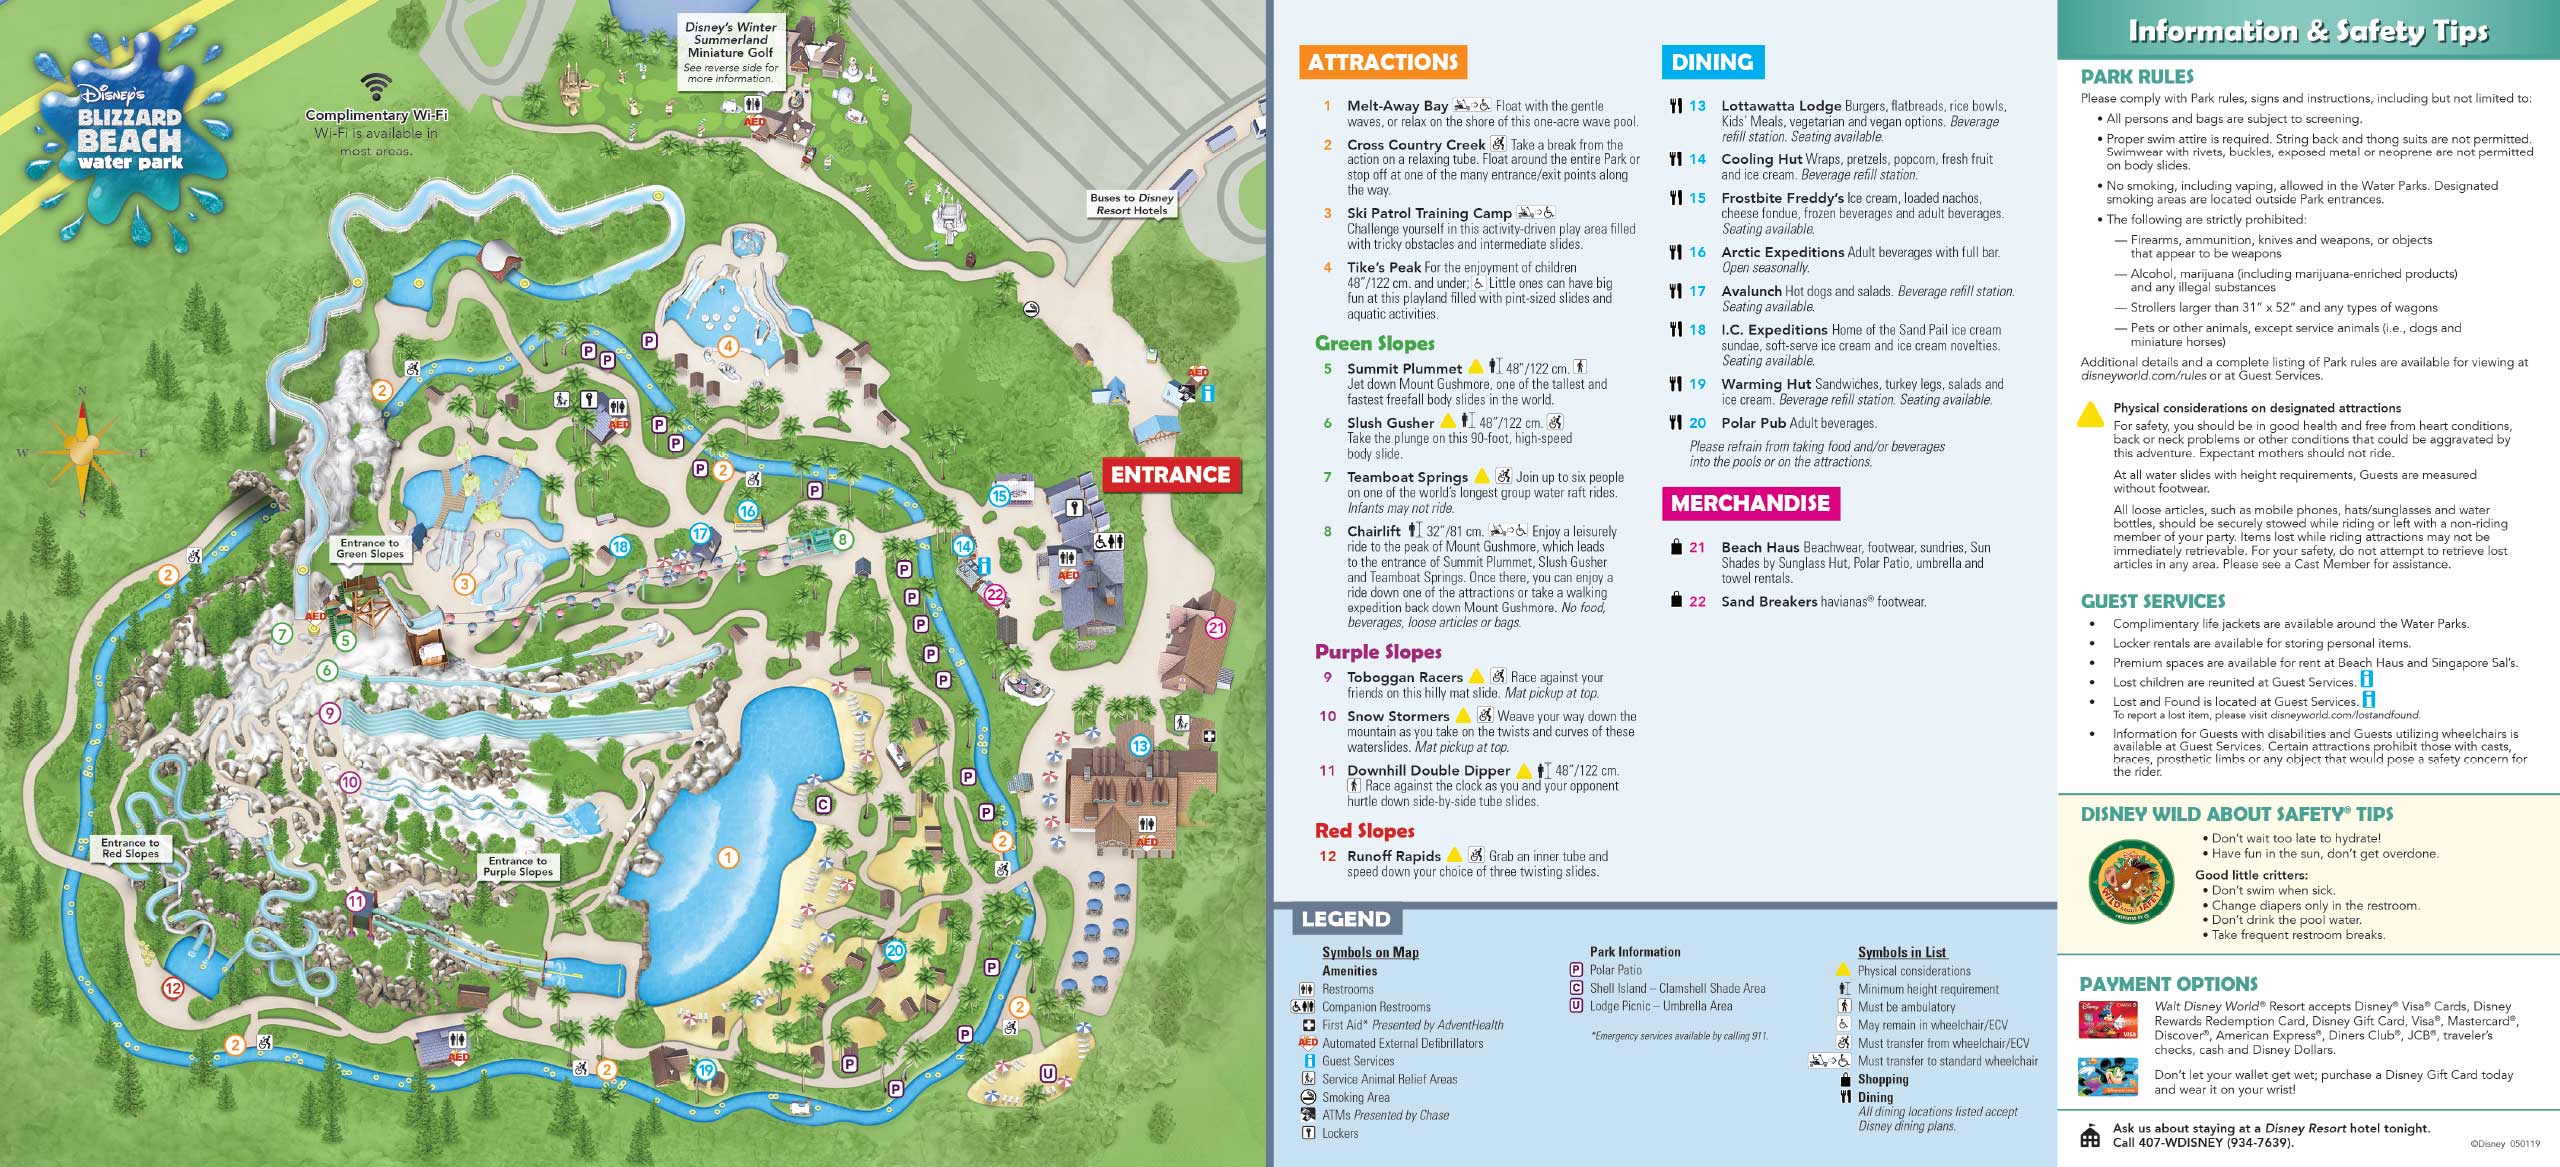 Lilo & Stitch Welcome You 2011 Disney's Water Parks Guide & Two Park Maps 